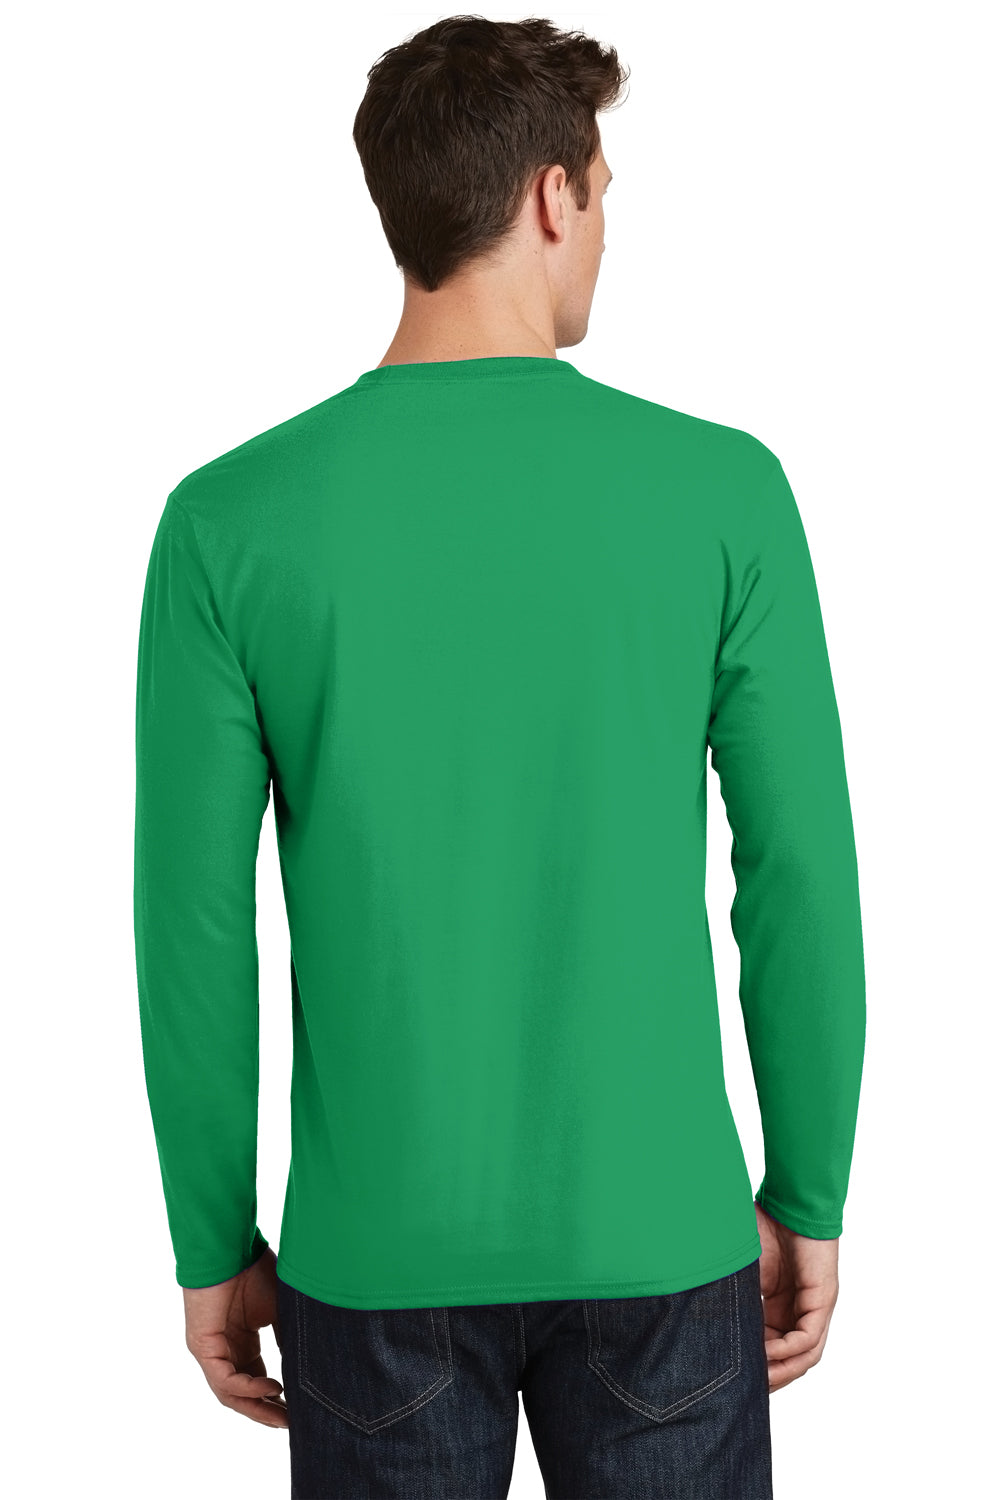 Kelly green men's classic t-shirt front and back 23370441 PNG